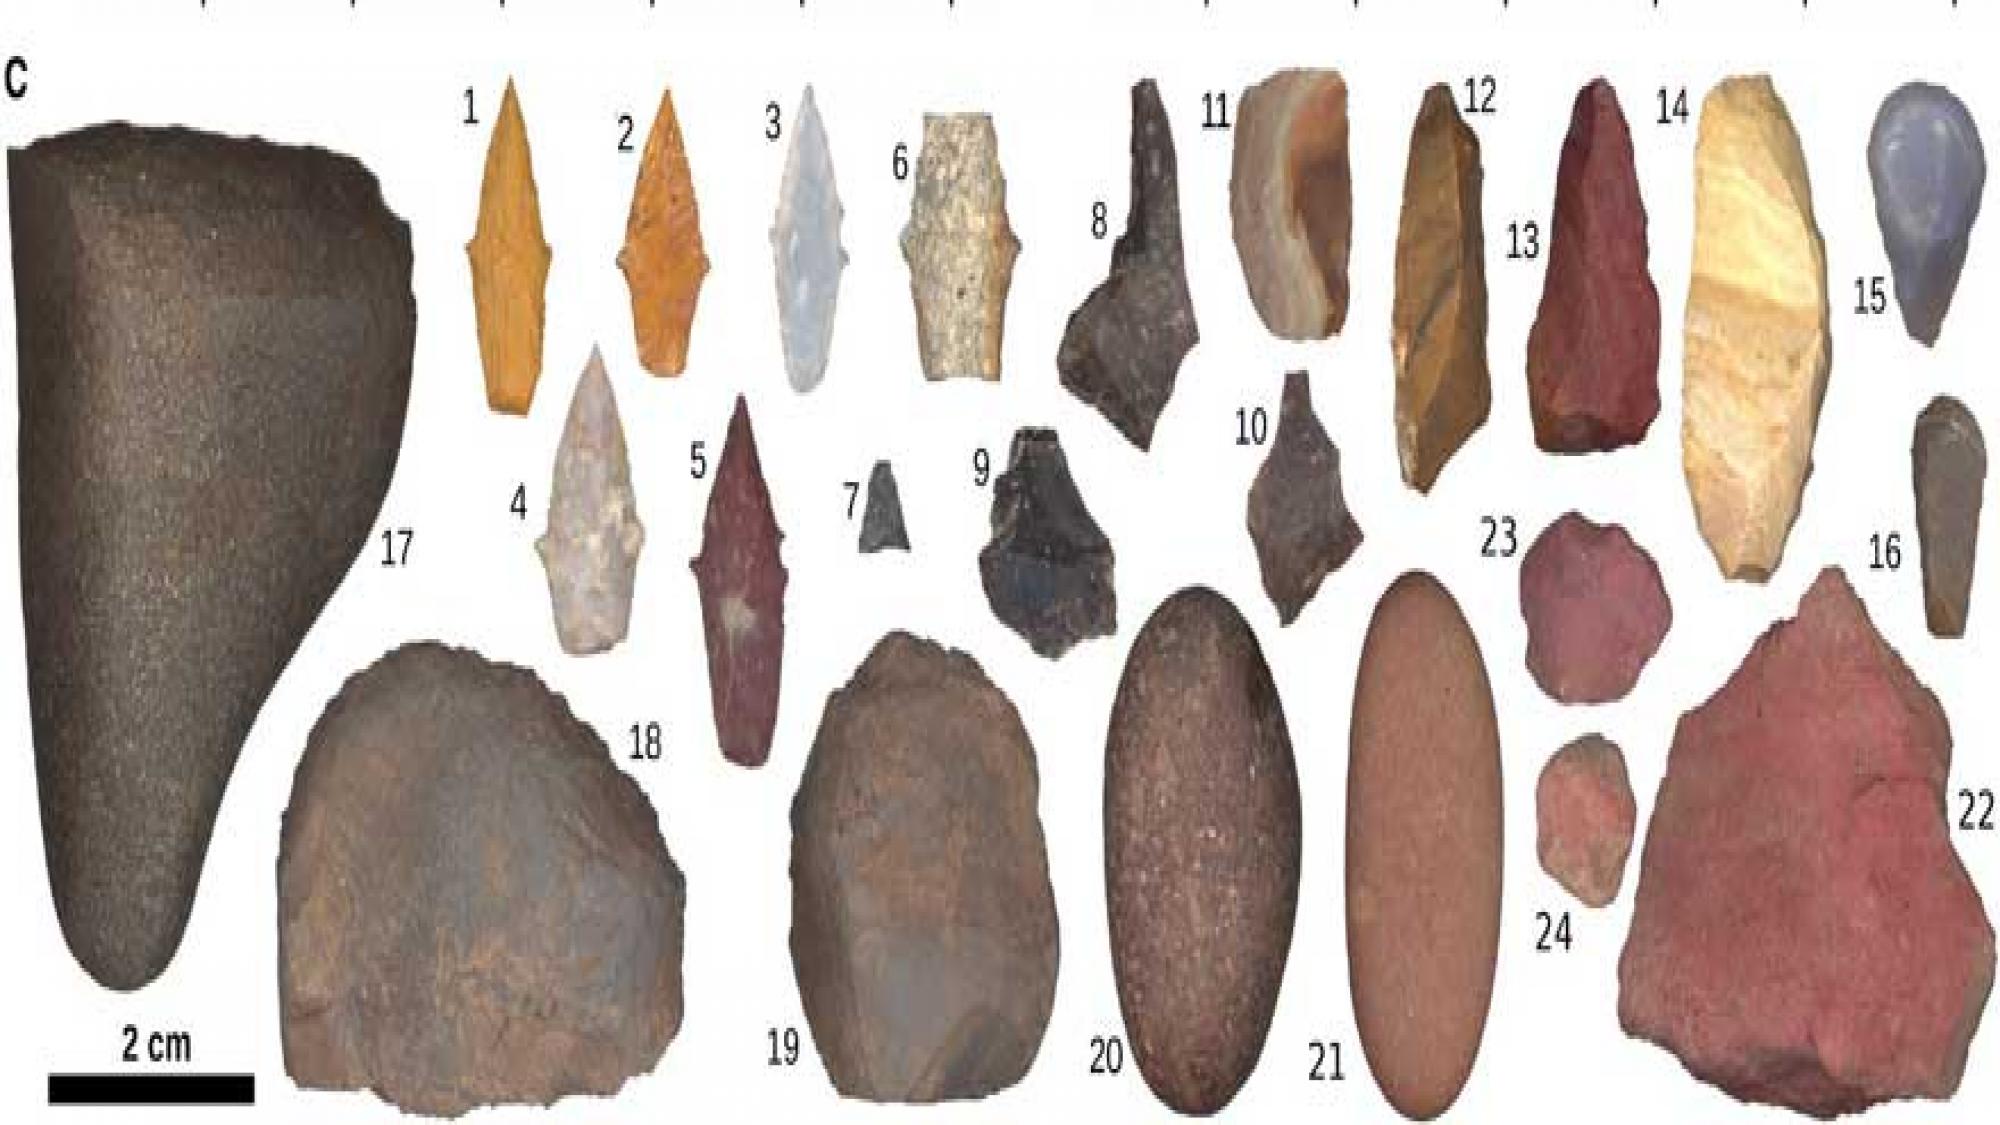 Variety of stone tools, numbered